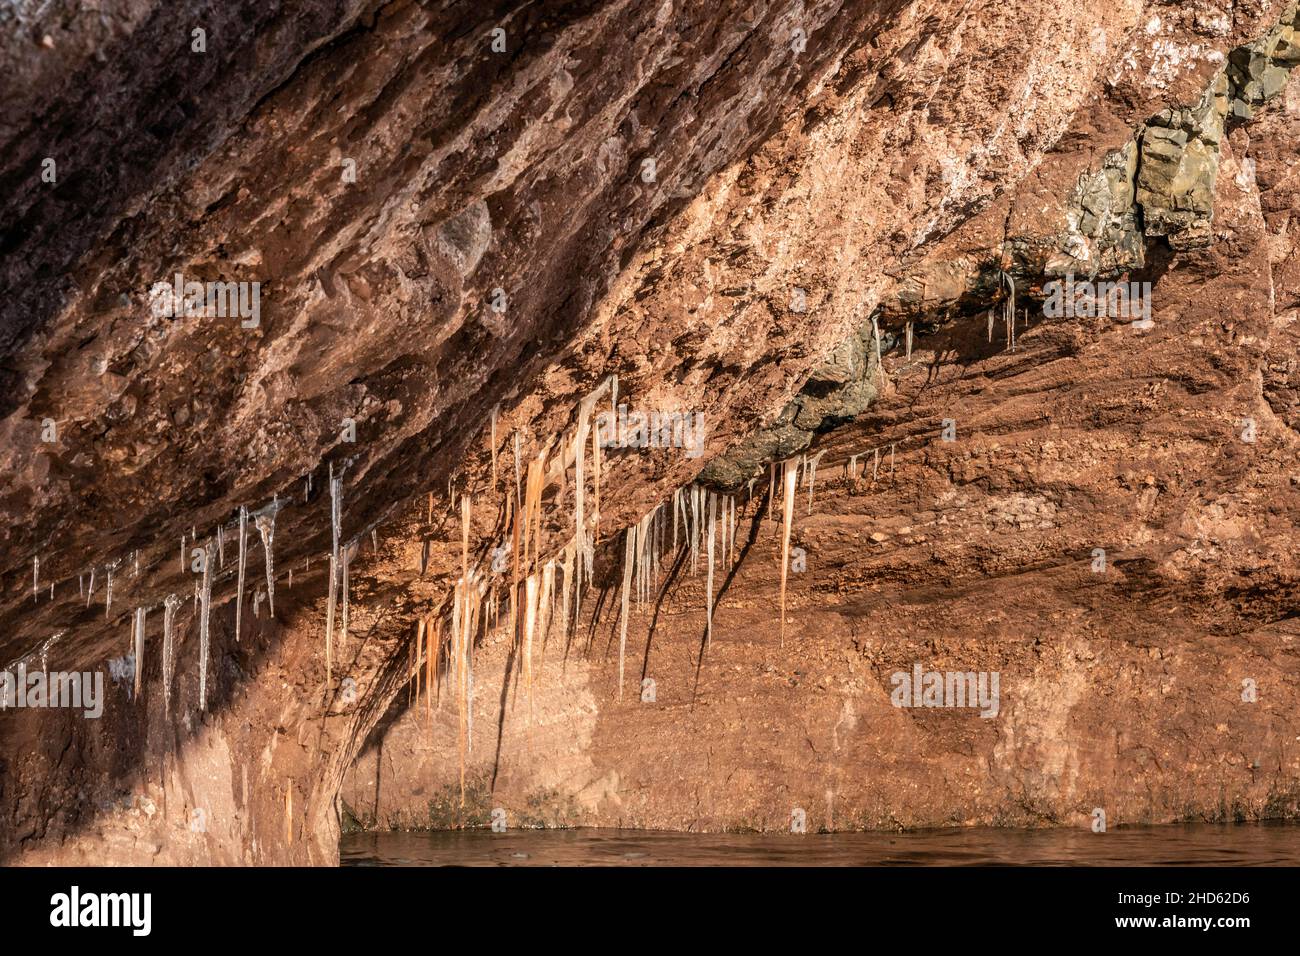 Red sandstone conglomerate overhang with icicles, Rode O, Rodefjord, Scoresby Sund, Greenland Stock Photo